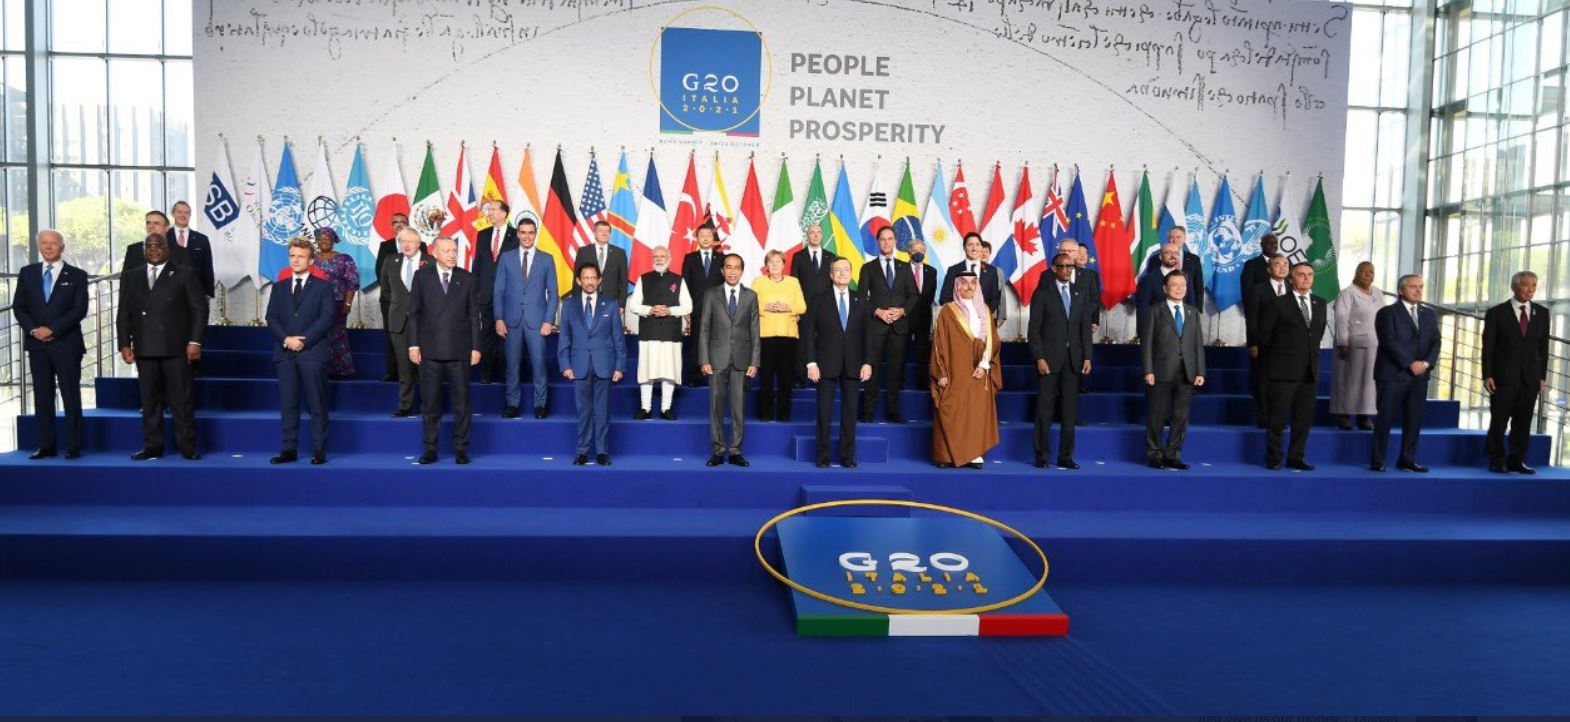 World leaders attending the G20 summit